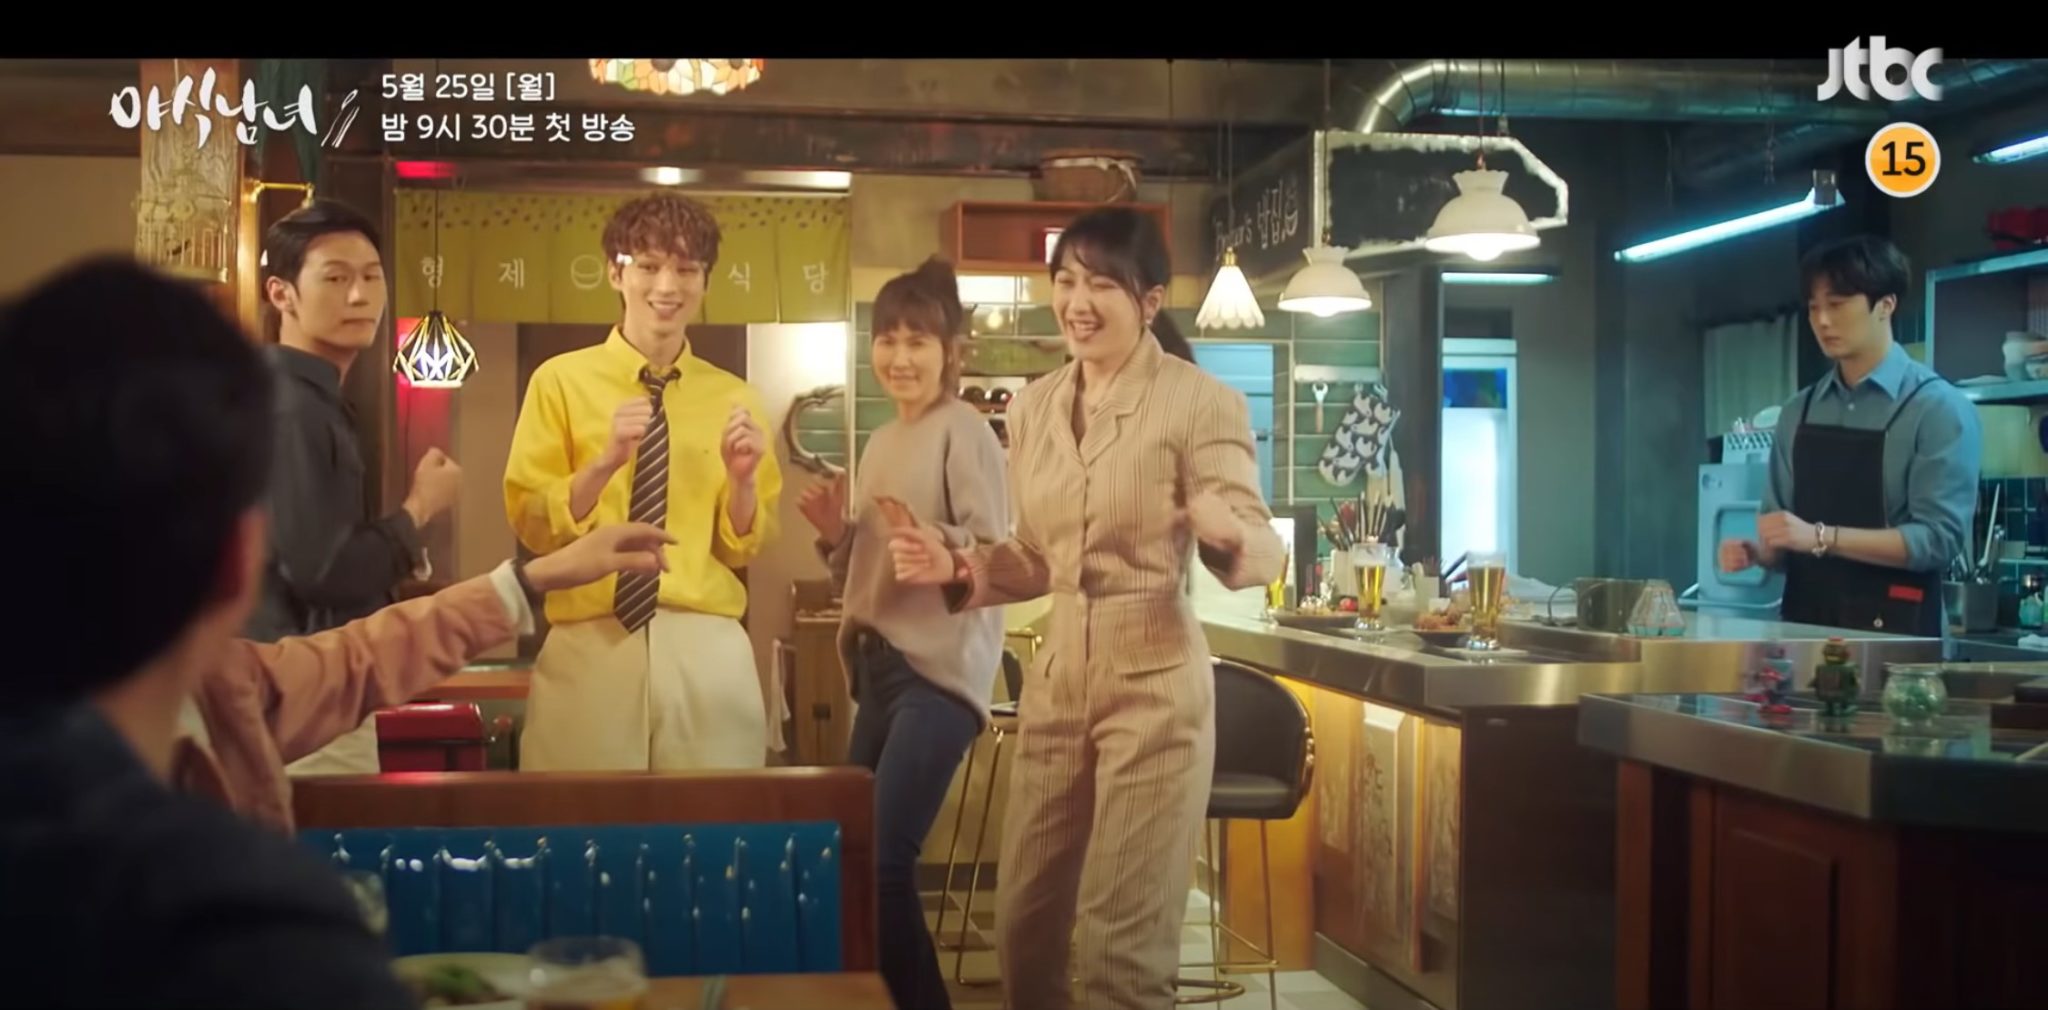 Dance party at Jung Il-woo’s restaurant in new teaser for Midnight Snack Couple